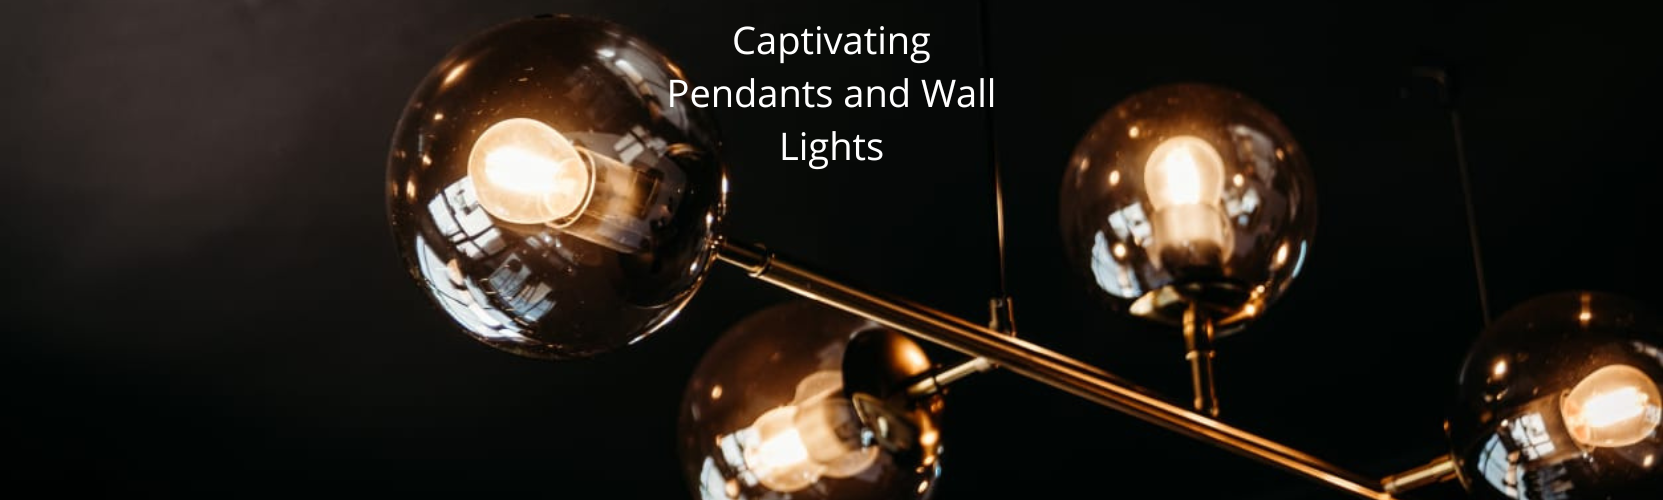 Captivating Pendants and Wall Lights